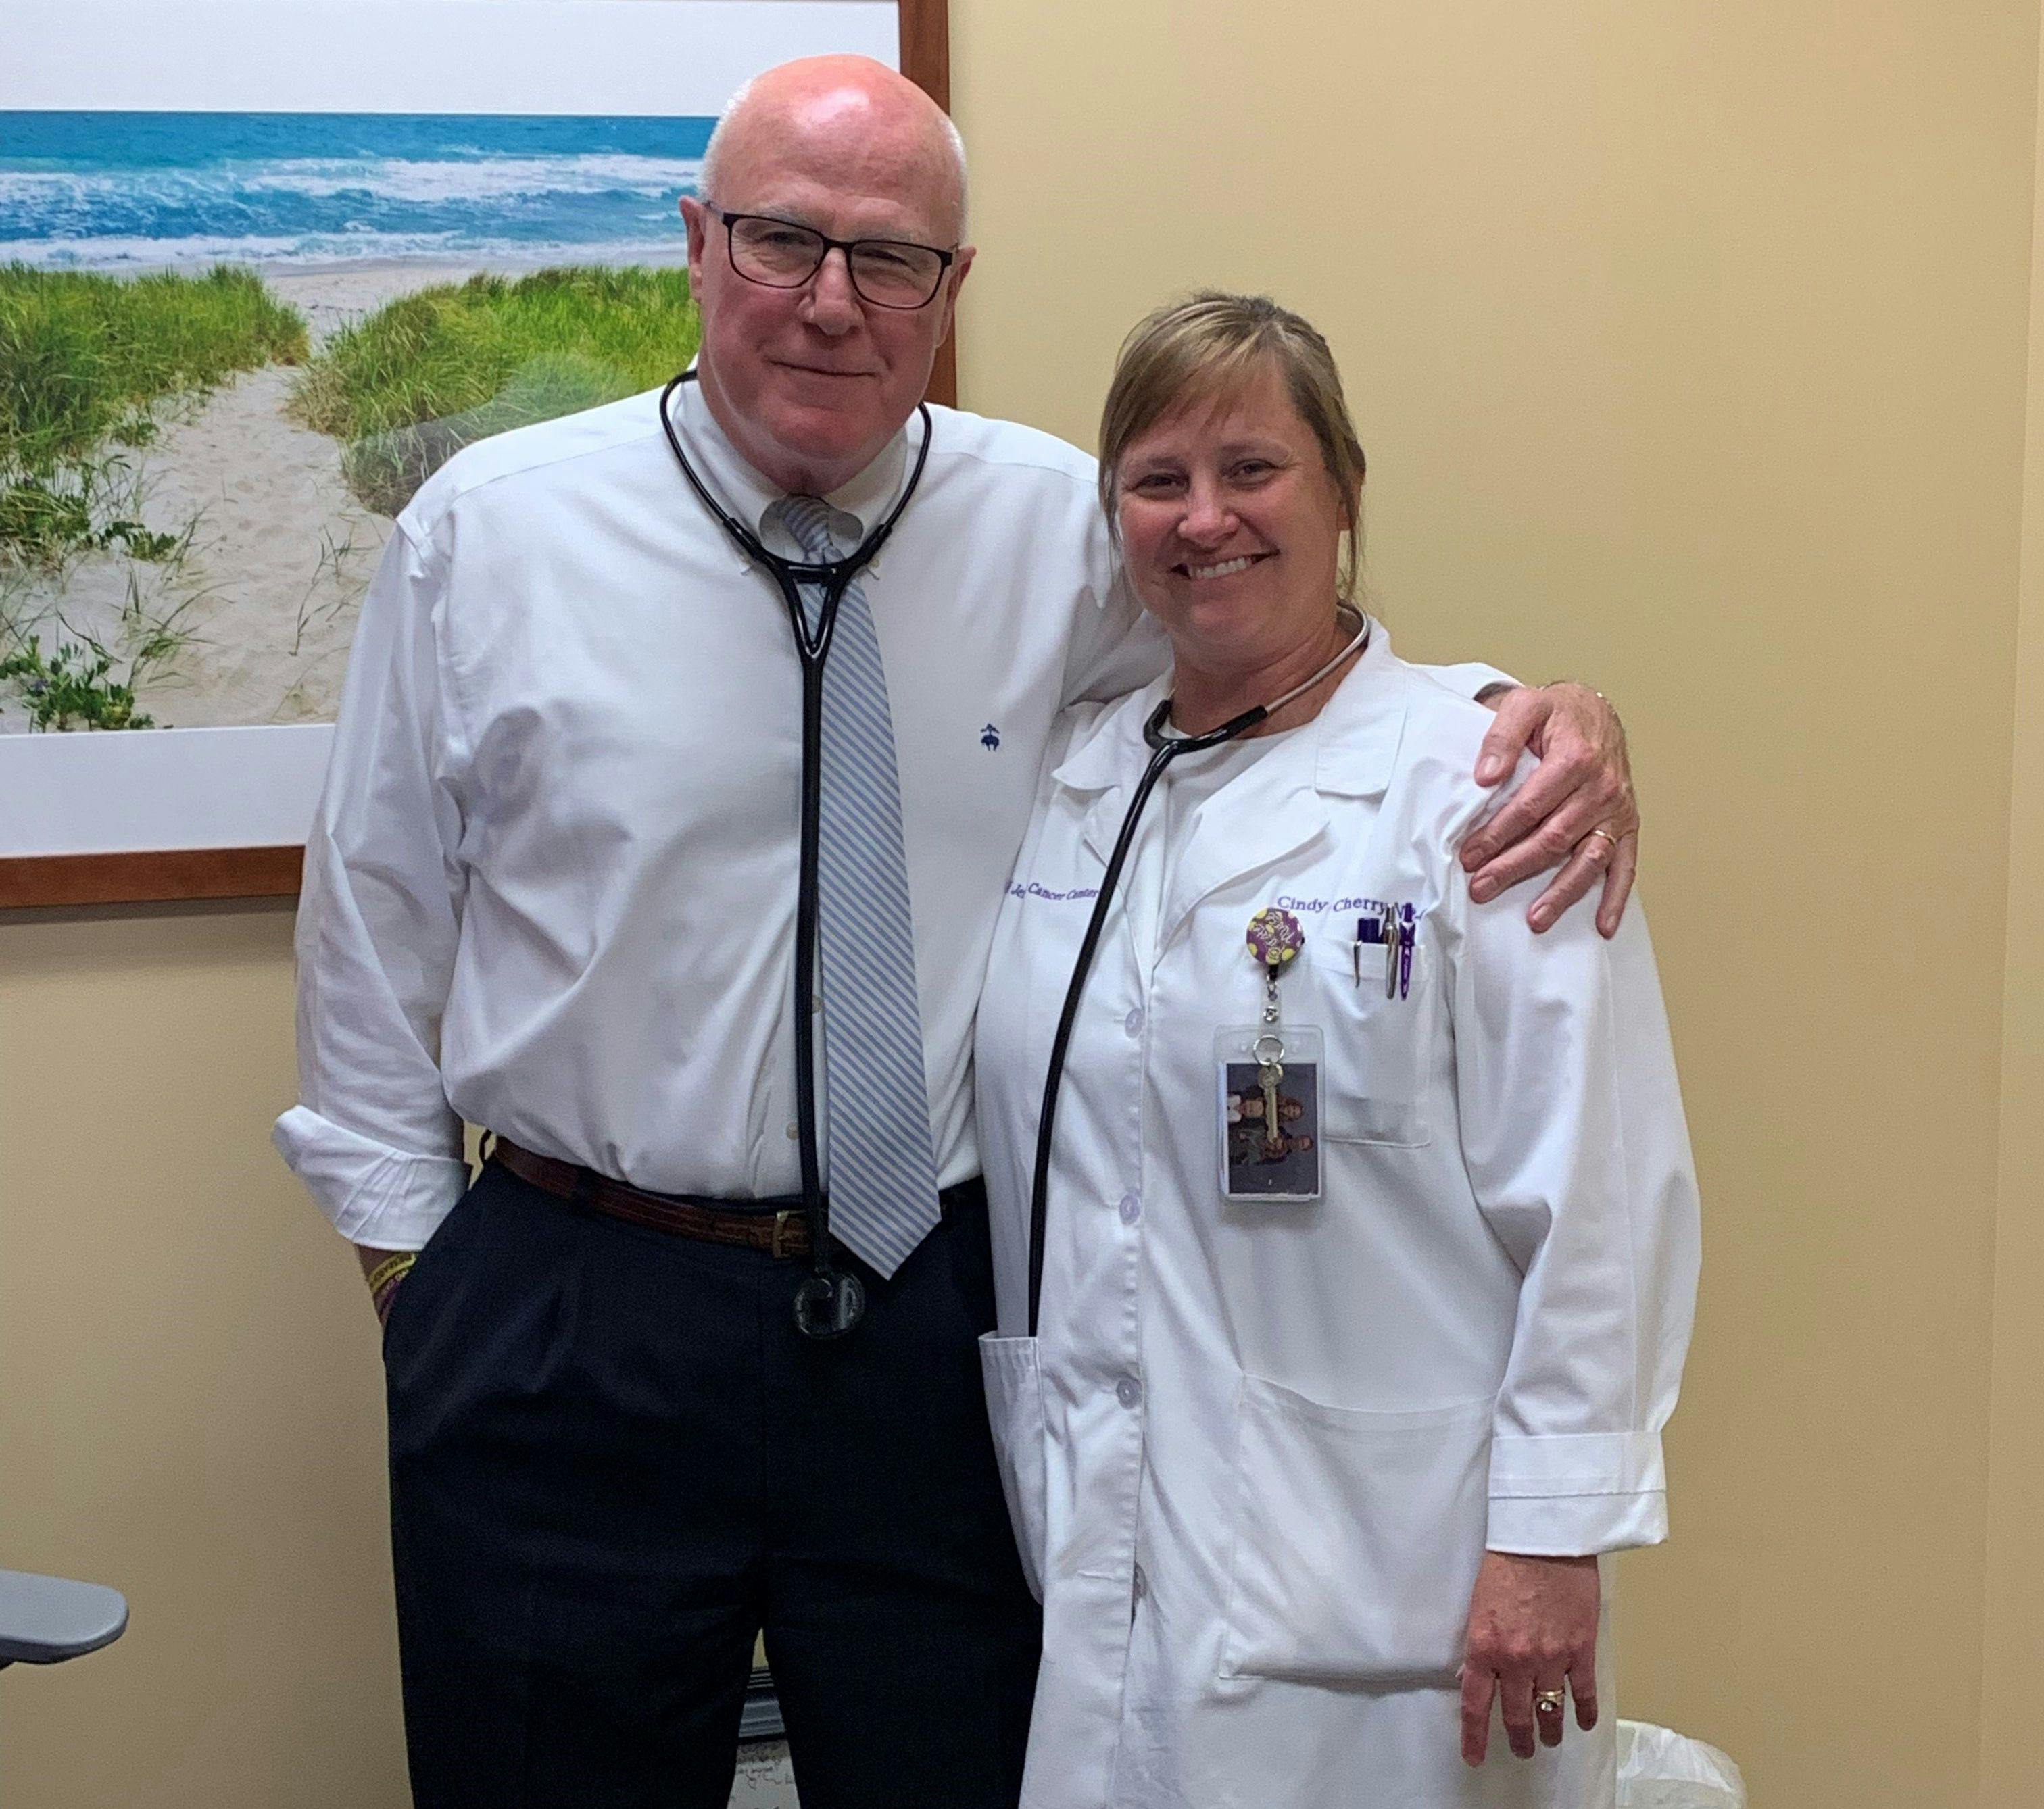 Cindy Cherry, MSN, AGNP-C, on the right with colleague Paul R. Walker, MD, FACP, on the left. Courtesy of Cindy Cherry, MSN, AGNP-C.